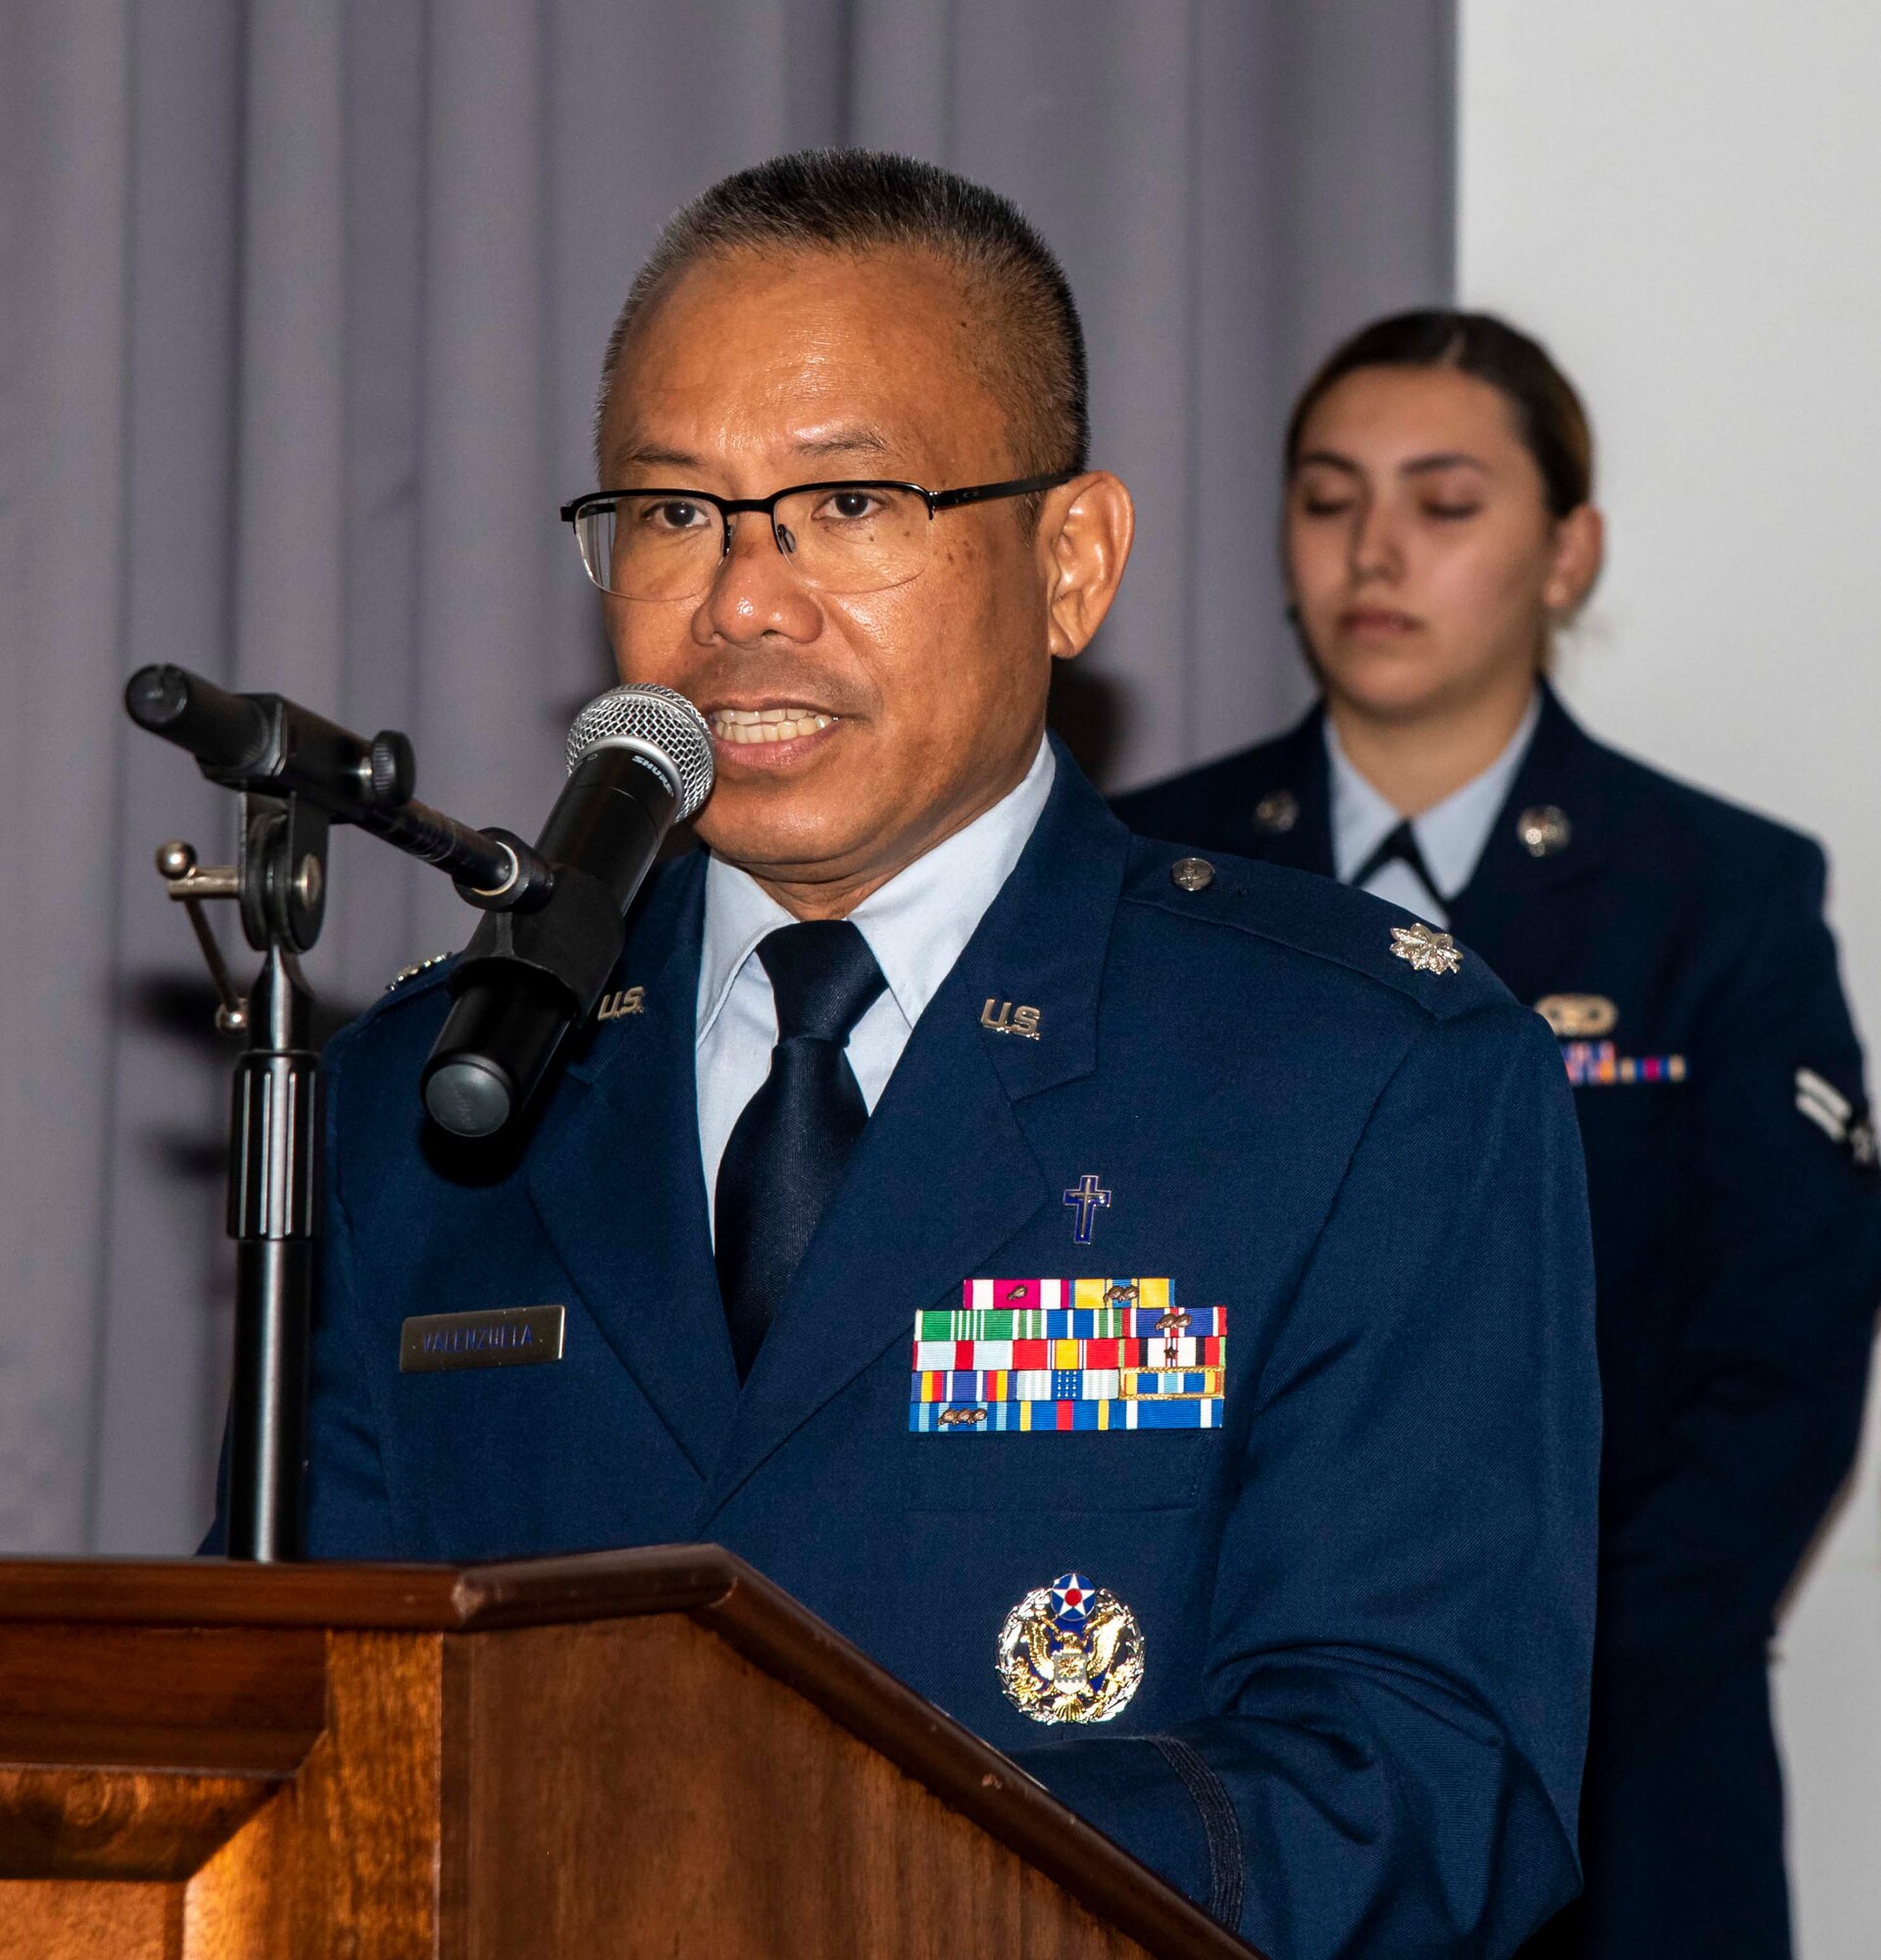 Lt. Col. Abner Valenzuela, 436th Airlift Wing chaplain, performs an invocation during the 436th Comptroller Squadron change of command ceremony on Dover Air Force Base, Delaware, June 28, 2021. The ceremony saw outgoing commander, Maj. Kevin Byram, relinquish command to Lt. Col. Gretchen Lewis. (U.S. Air Force photo by Airman 1st Class Stephani Barge)